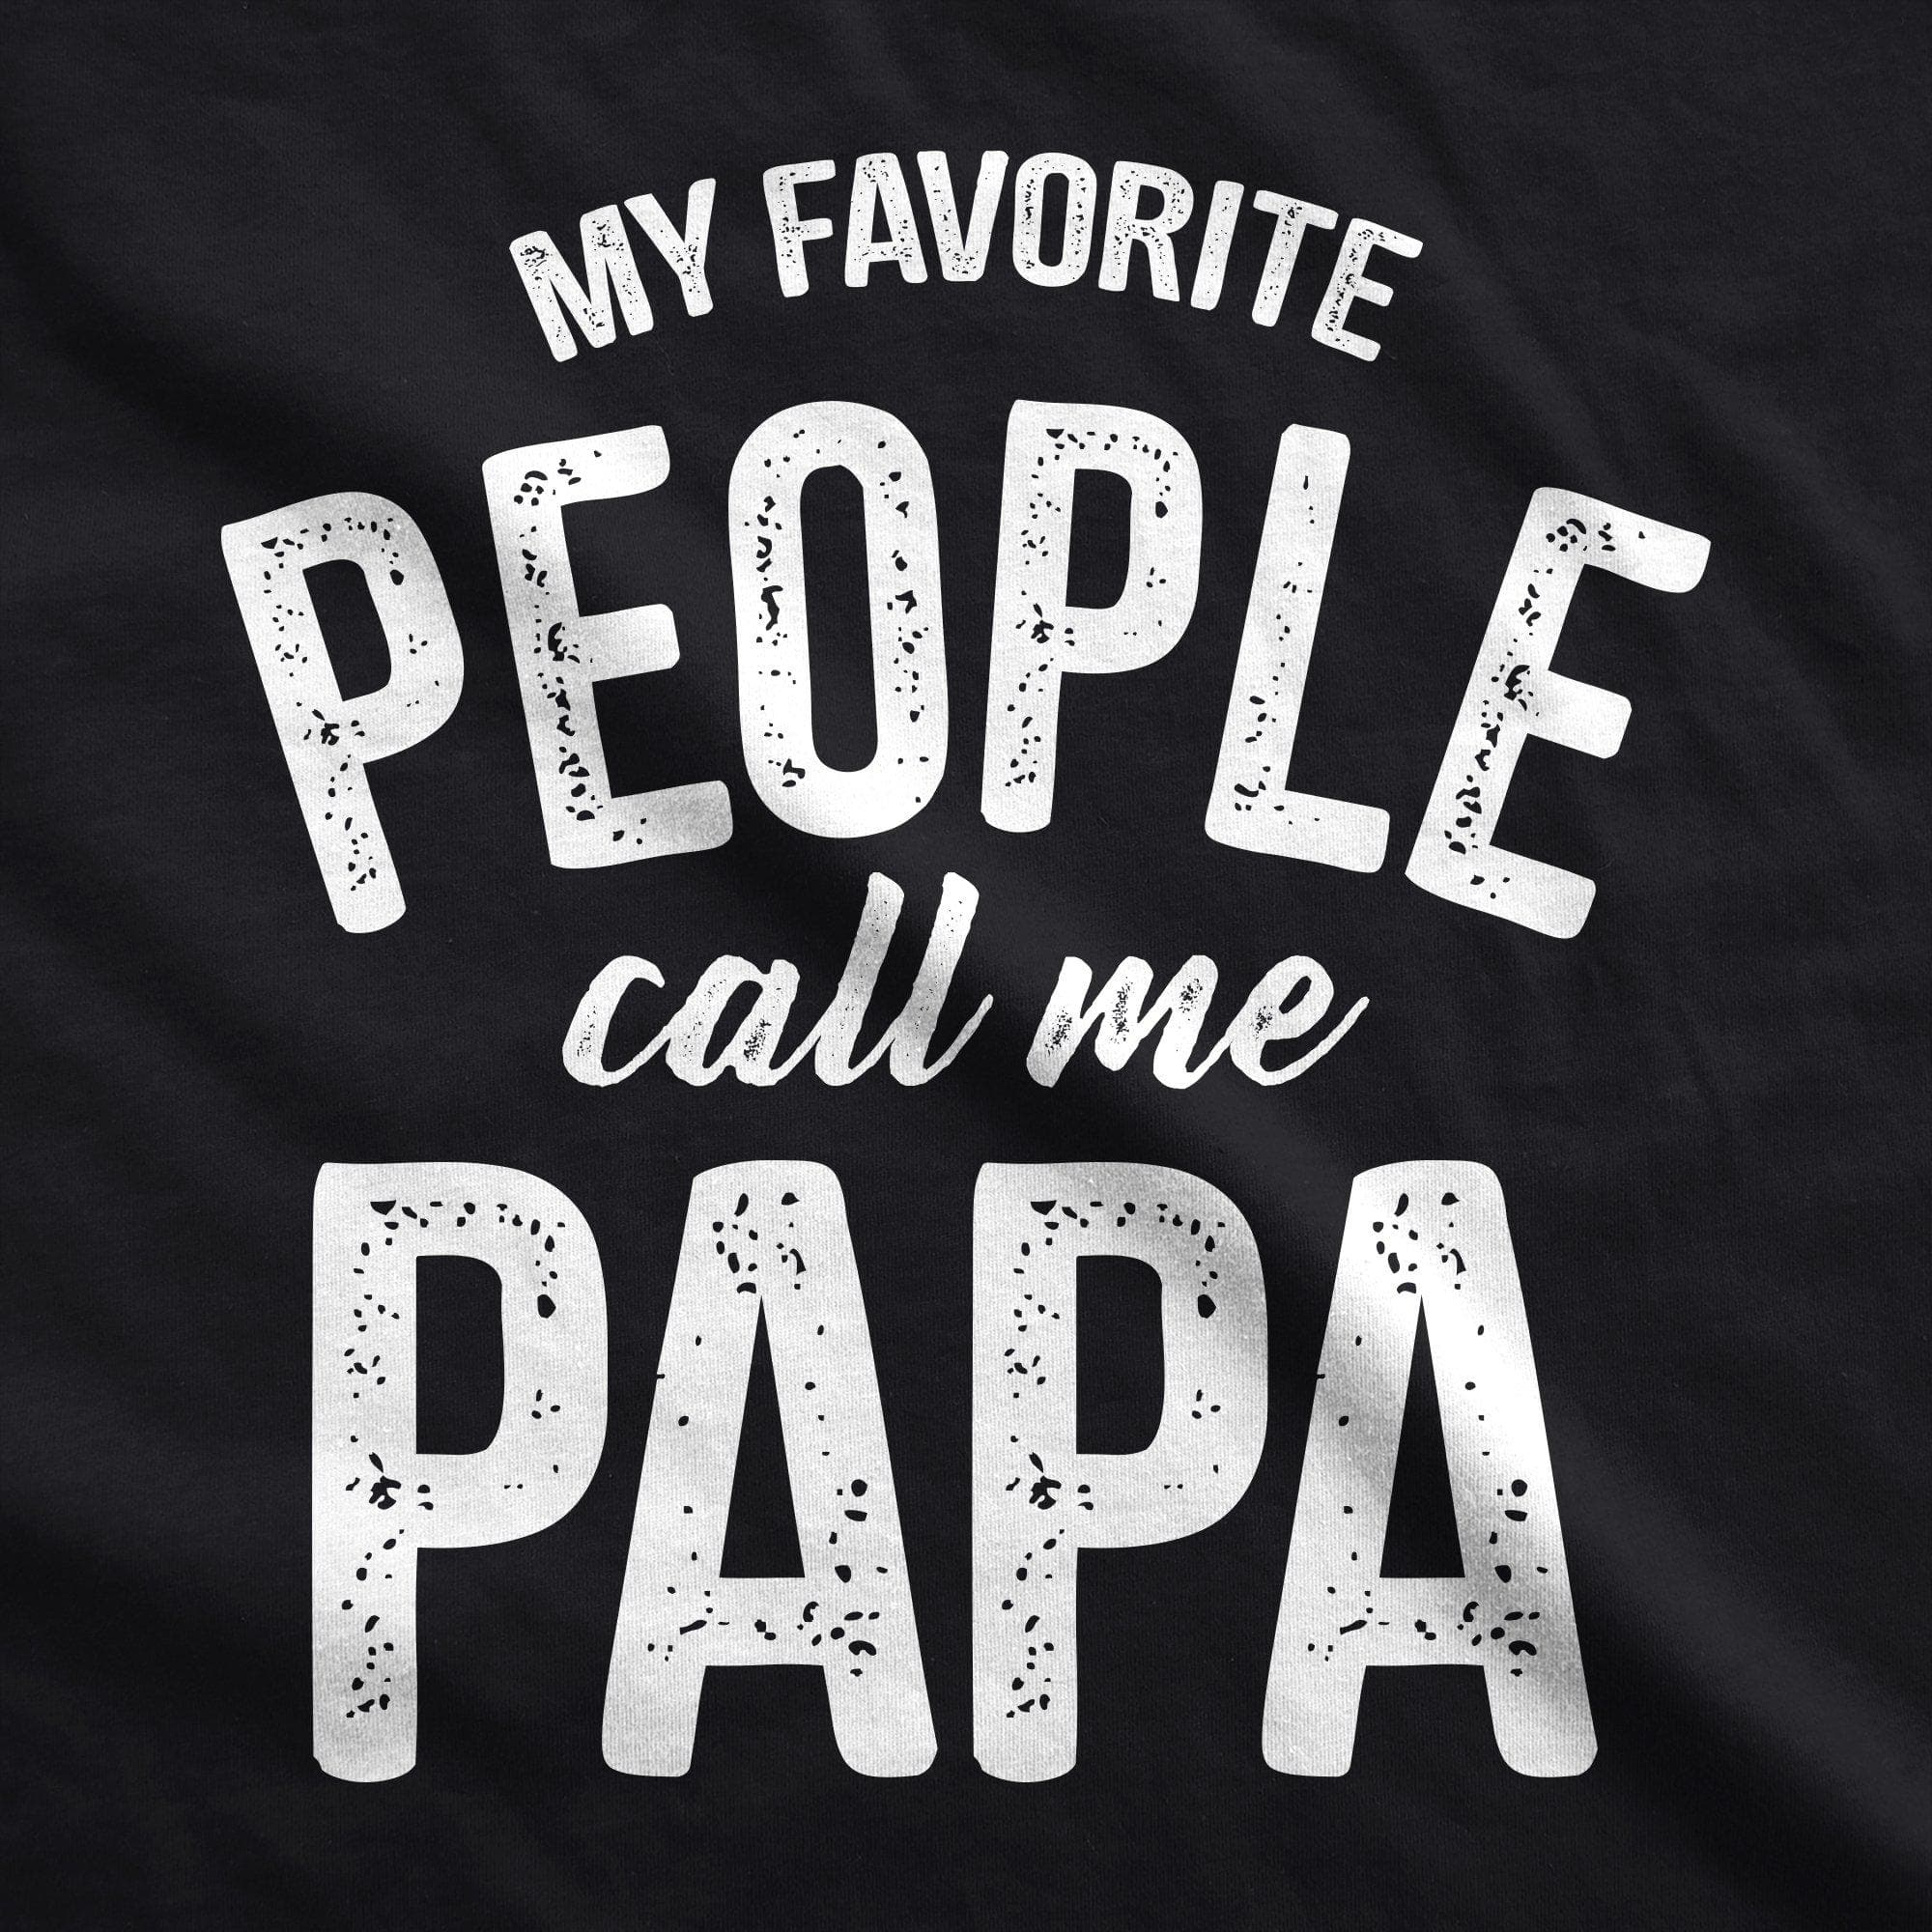 My Favorite People Call Me Papa Face Mask Mask - Crazy Dog T-Shirts